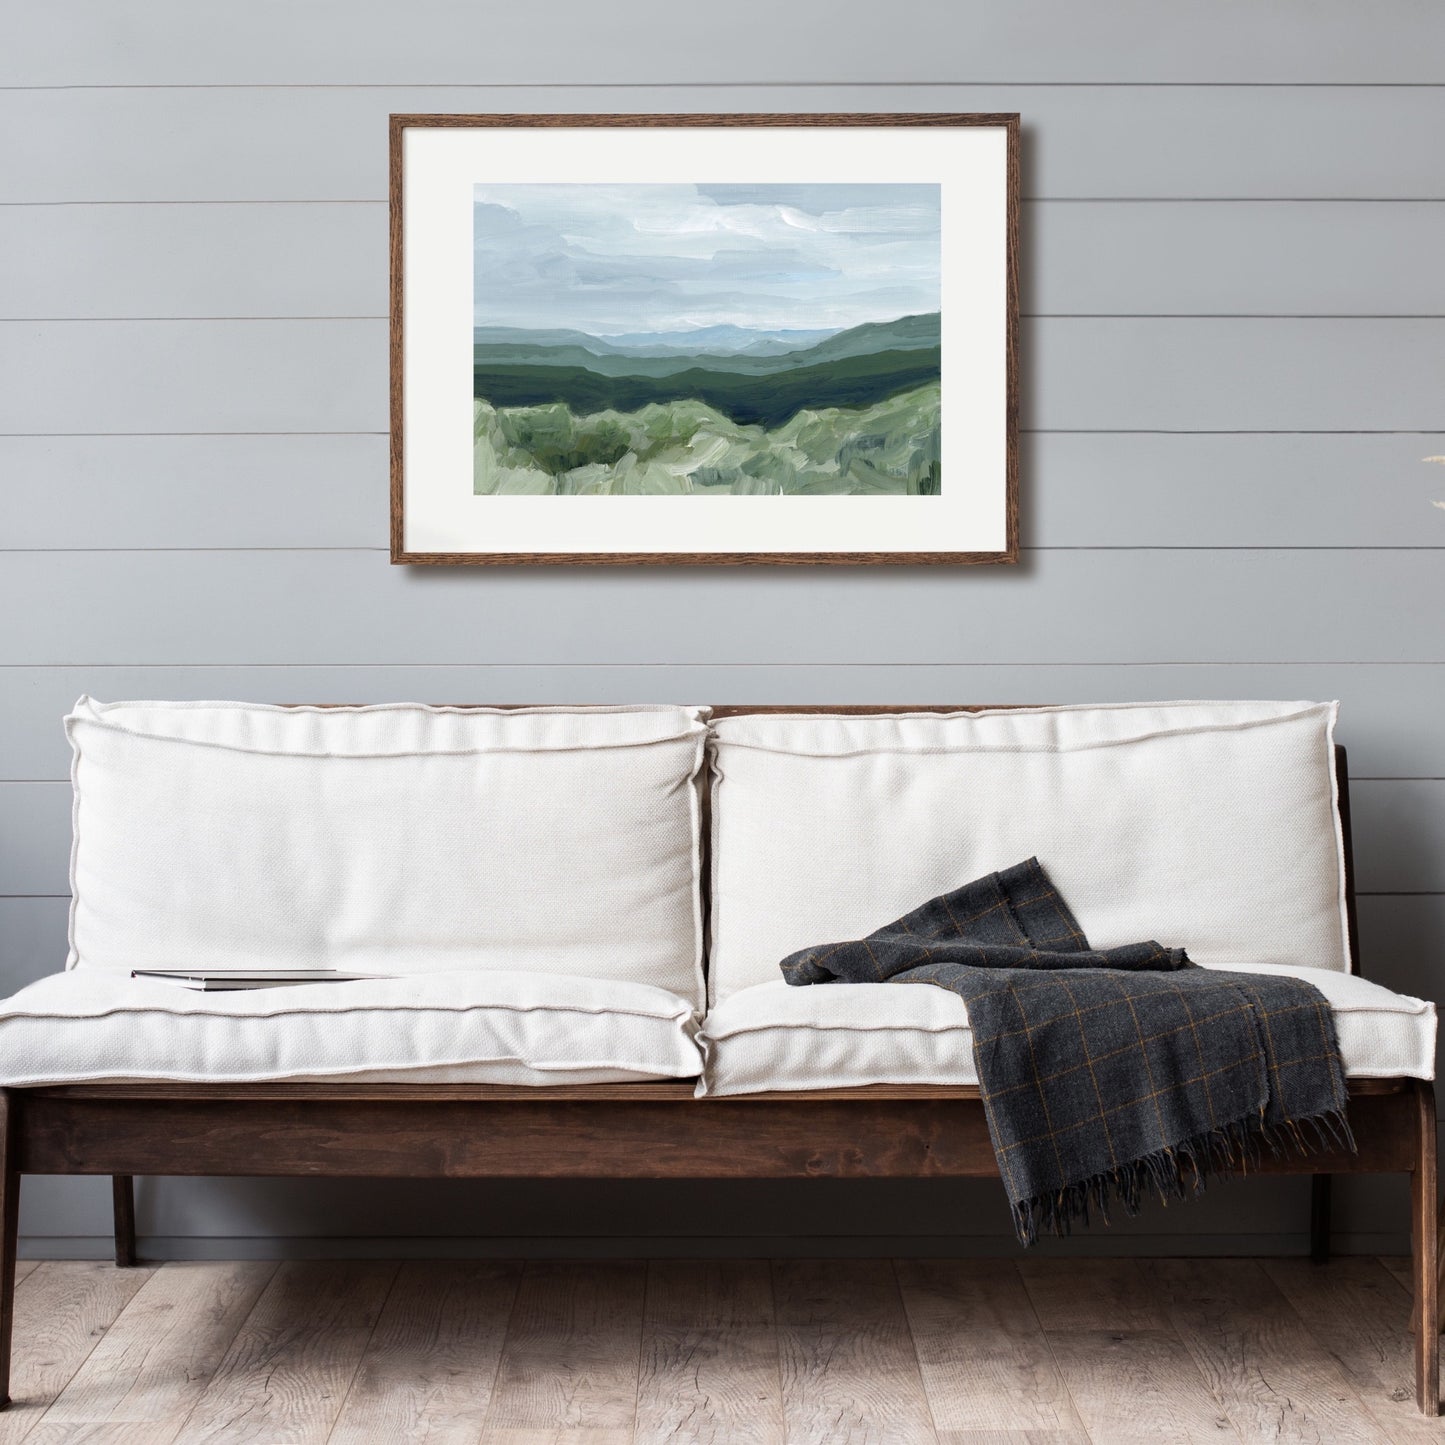 "View From Our Cabin" Art Print - Katie Garrison Art